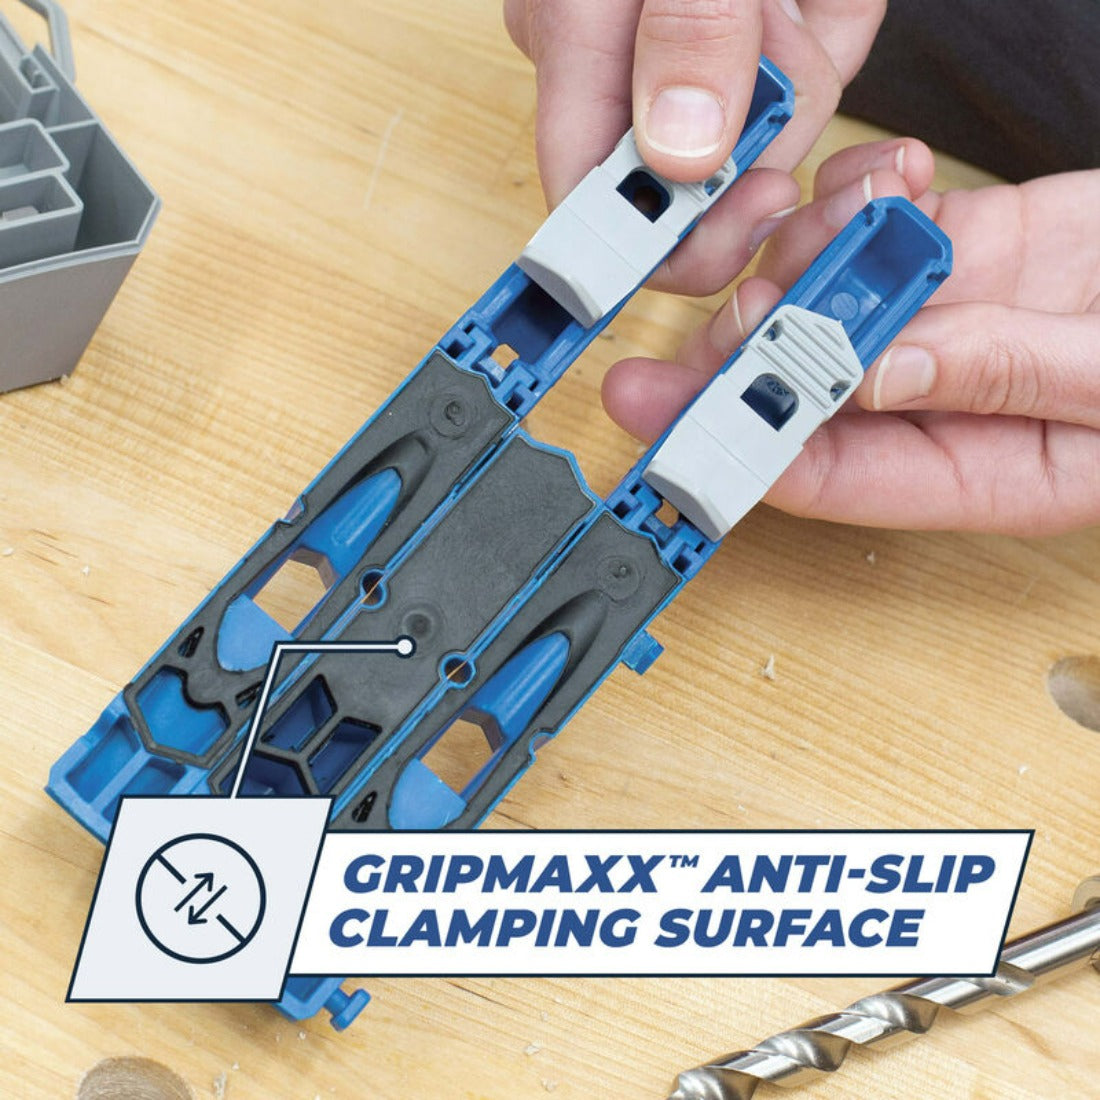 image showing the gripmaxx anti-slip clamping surface on the bottom of the 320 jig